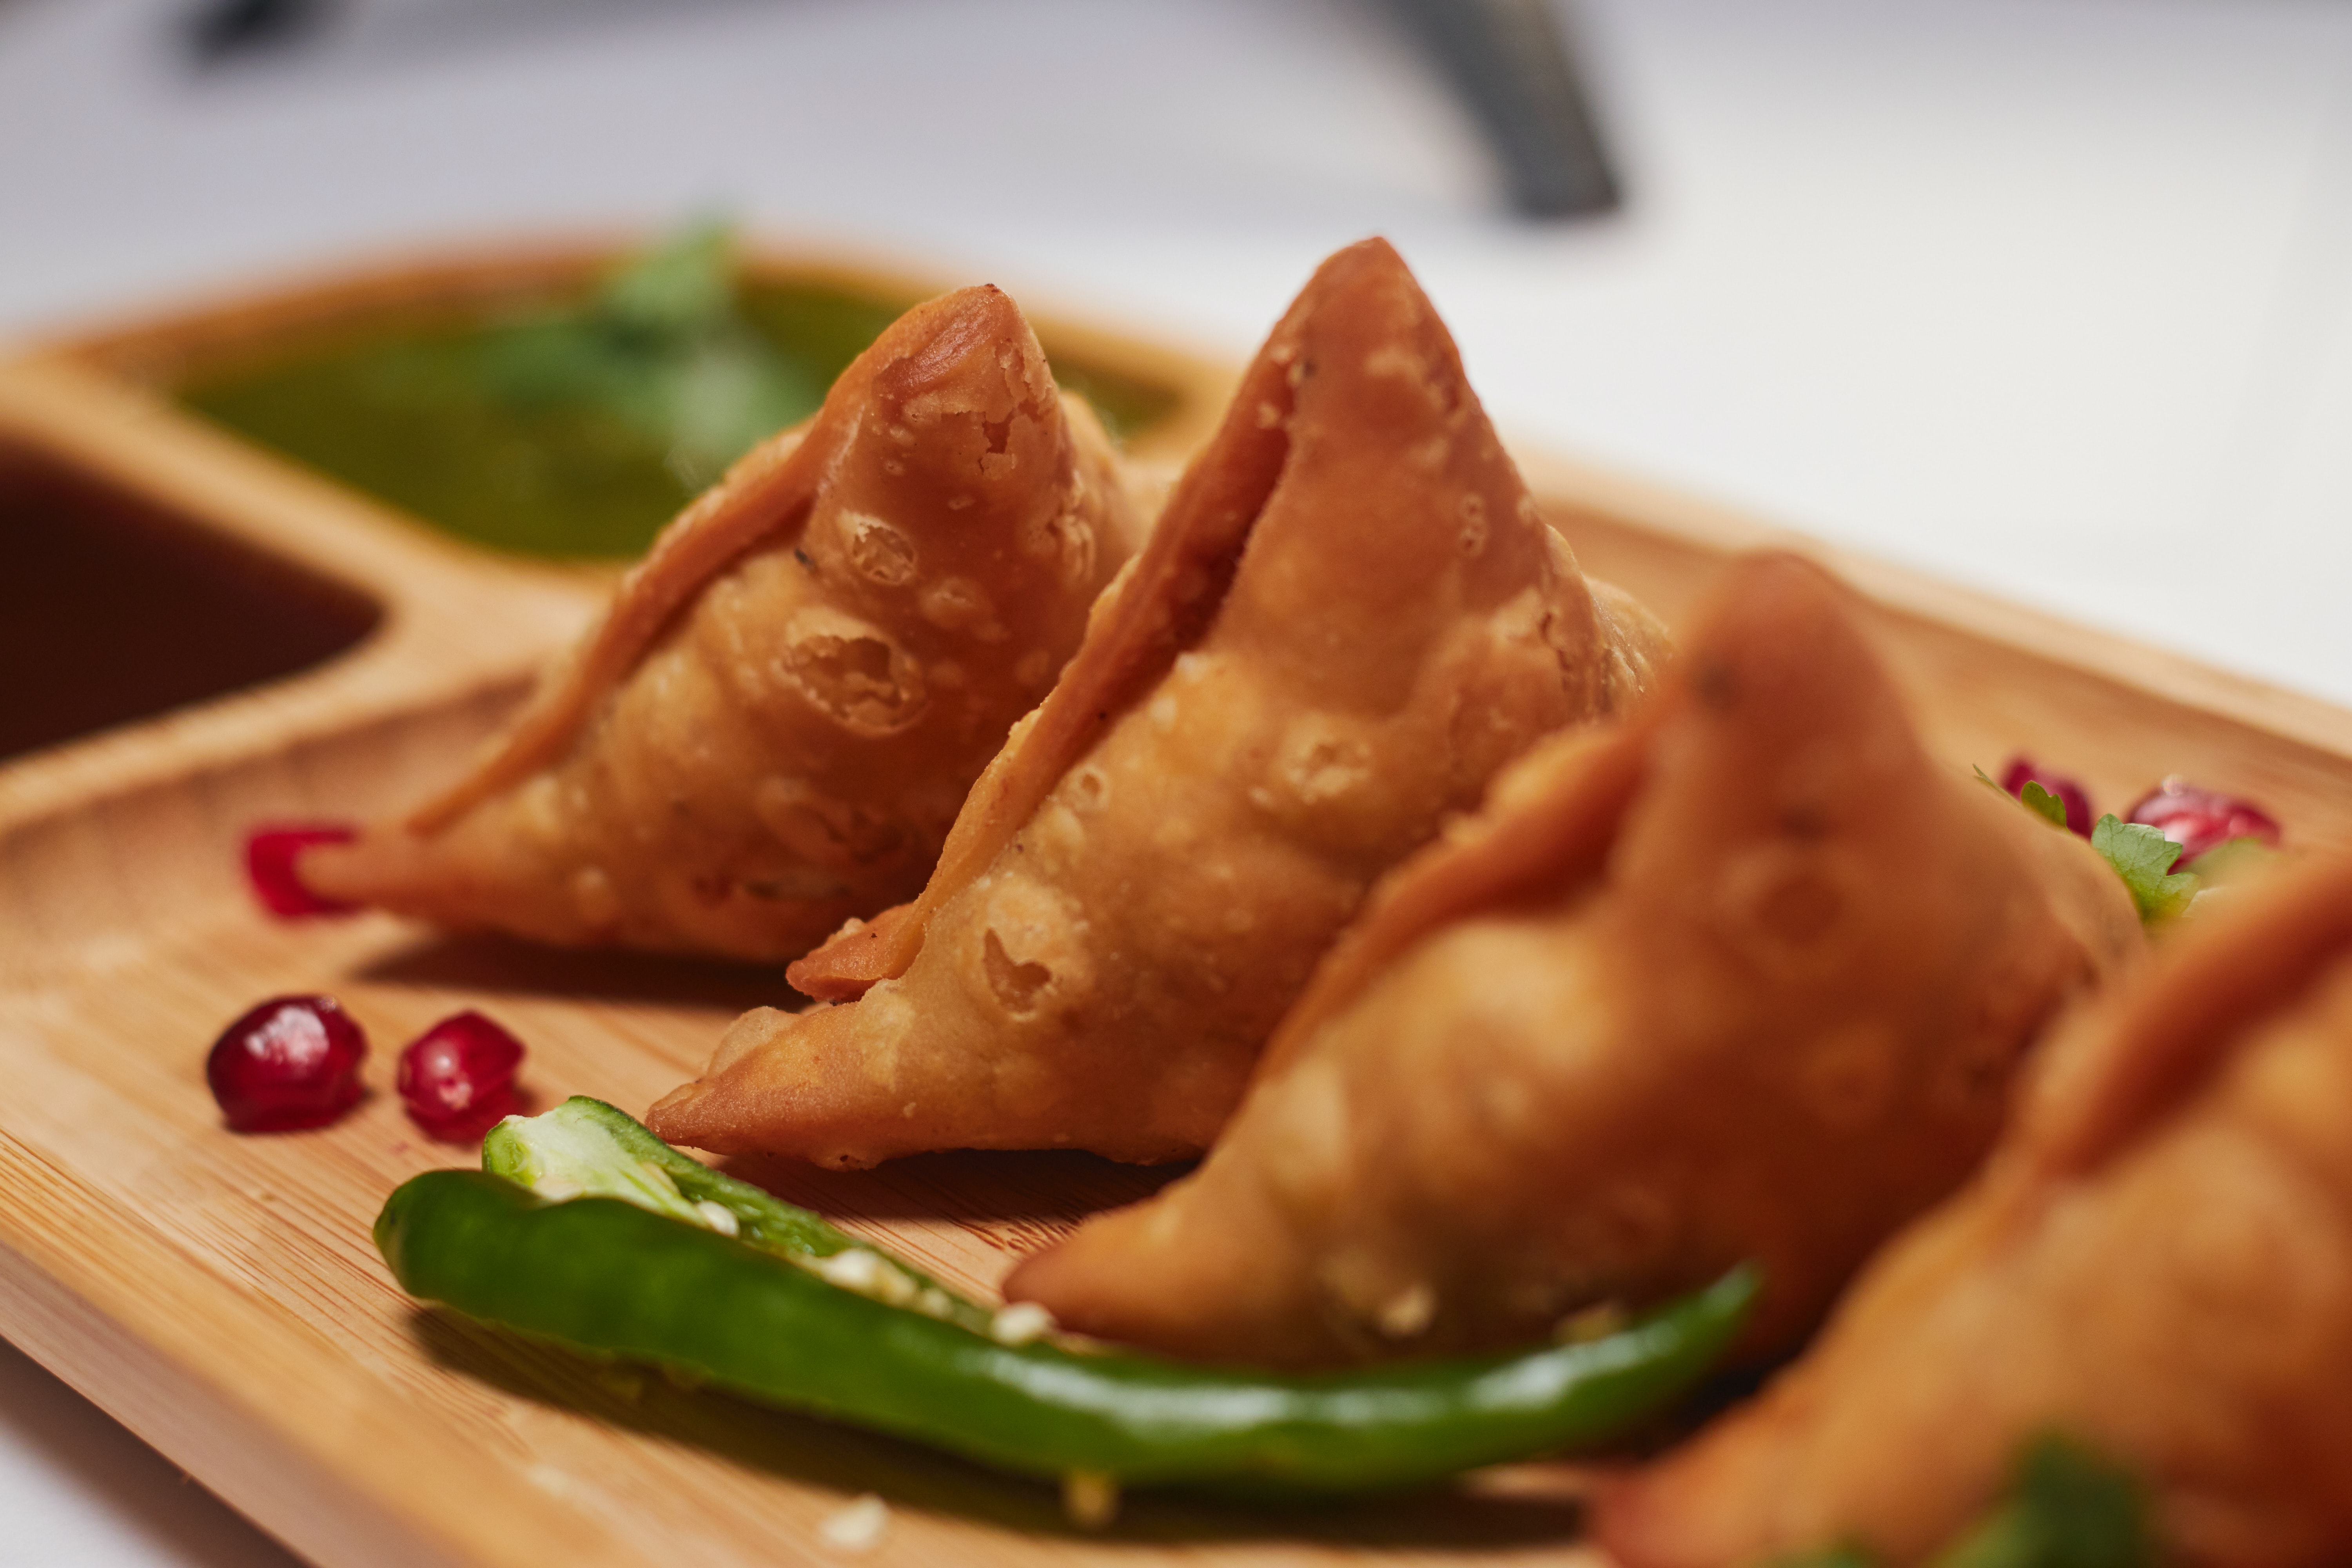 Four samosas served with herbs and chilis on a small wooden tray